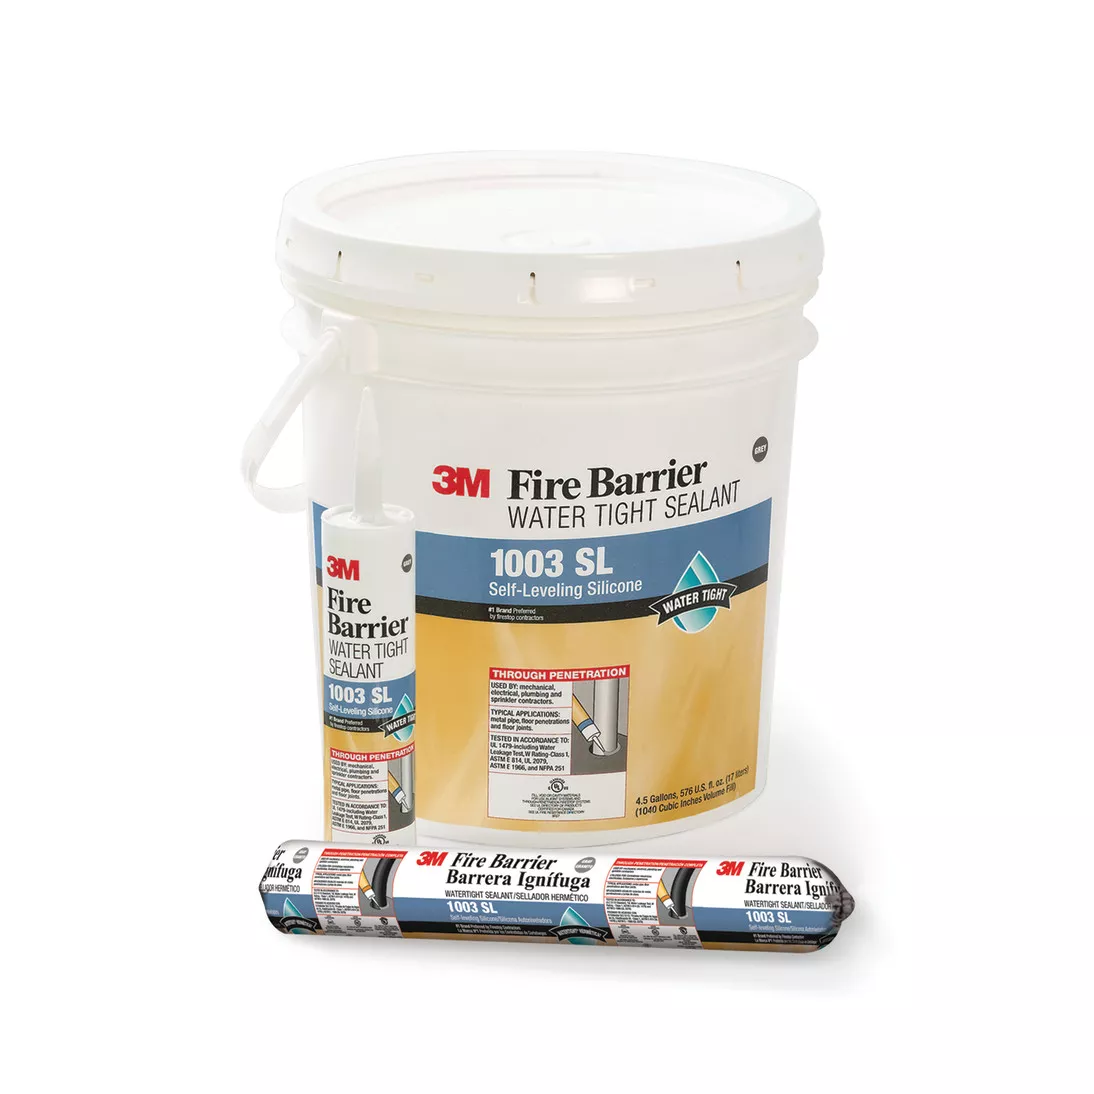 3M™ Fire Barrier Water Tight Sealant 1003 SL, Gray, 20 fl oz Sausage
Pack, 12/case